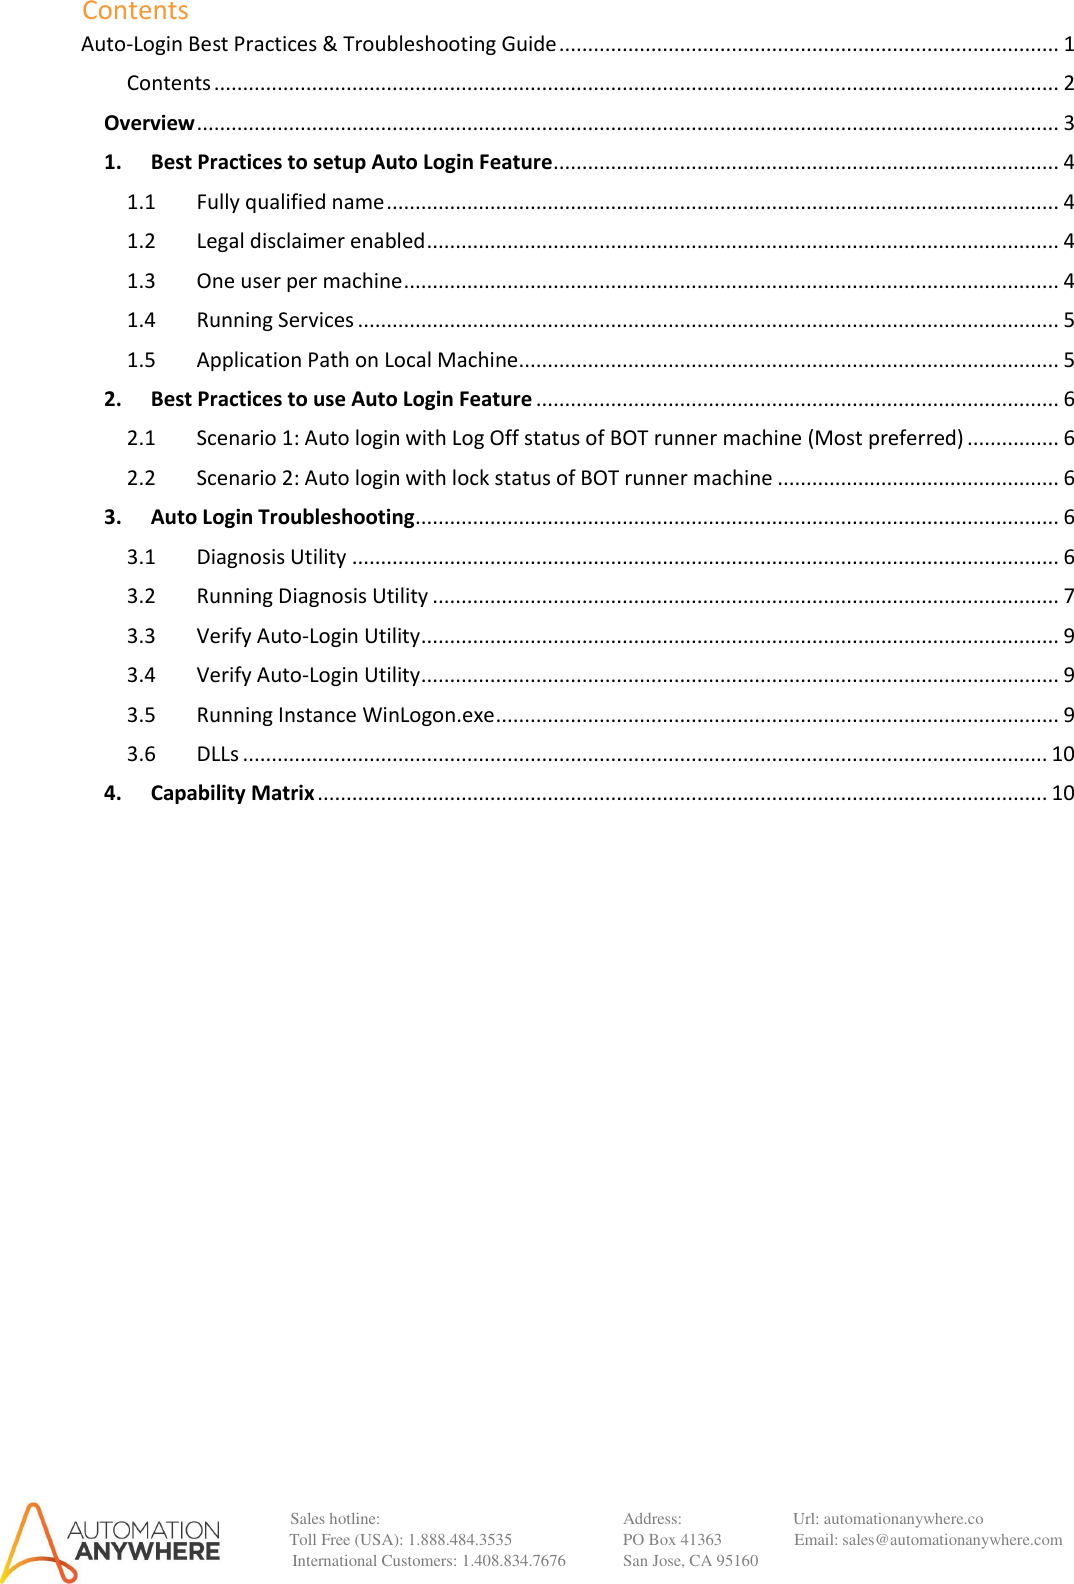 Page 2 of 11 - AAE Auto Login Best Practice Troubleshooting Guide[1]